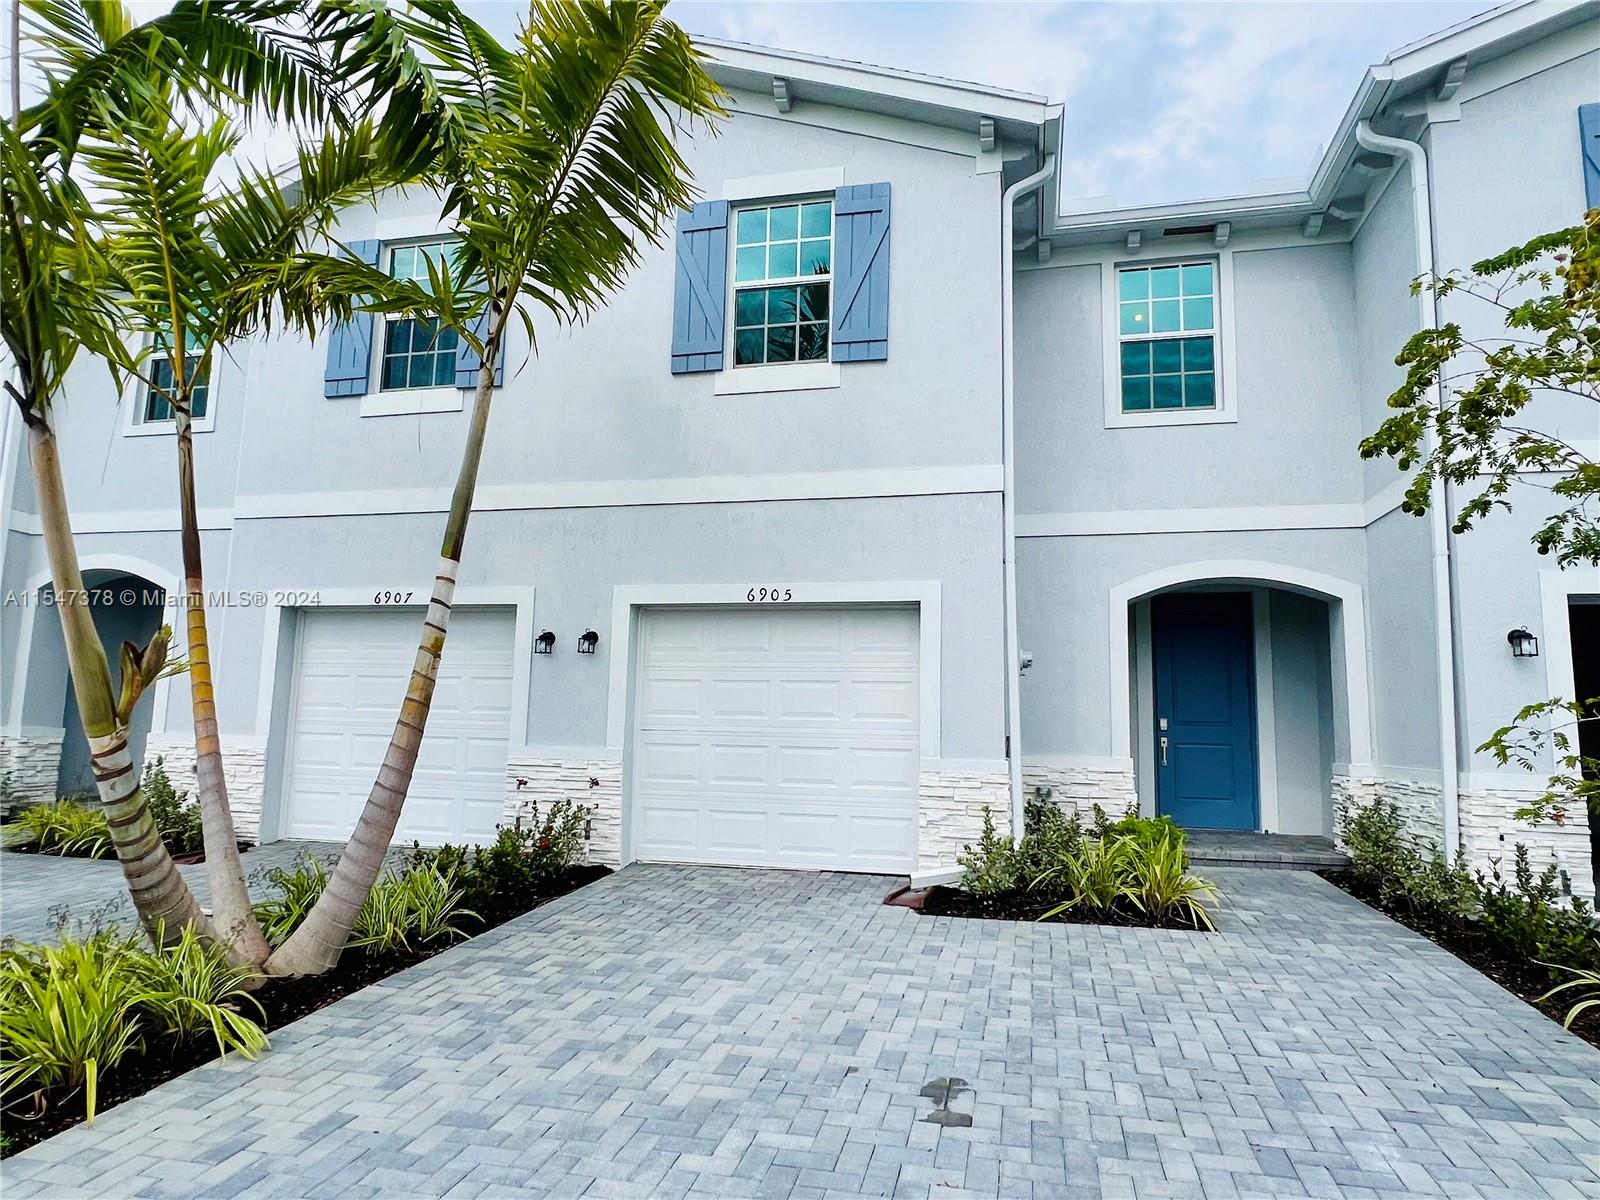 Rental Property at 6905 Harbours Edge Ave, Lake Worth, Palm Beach County, Florida - Bedrooms: 3 
Bathrooms: 3  - $3,100 MO.